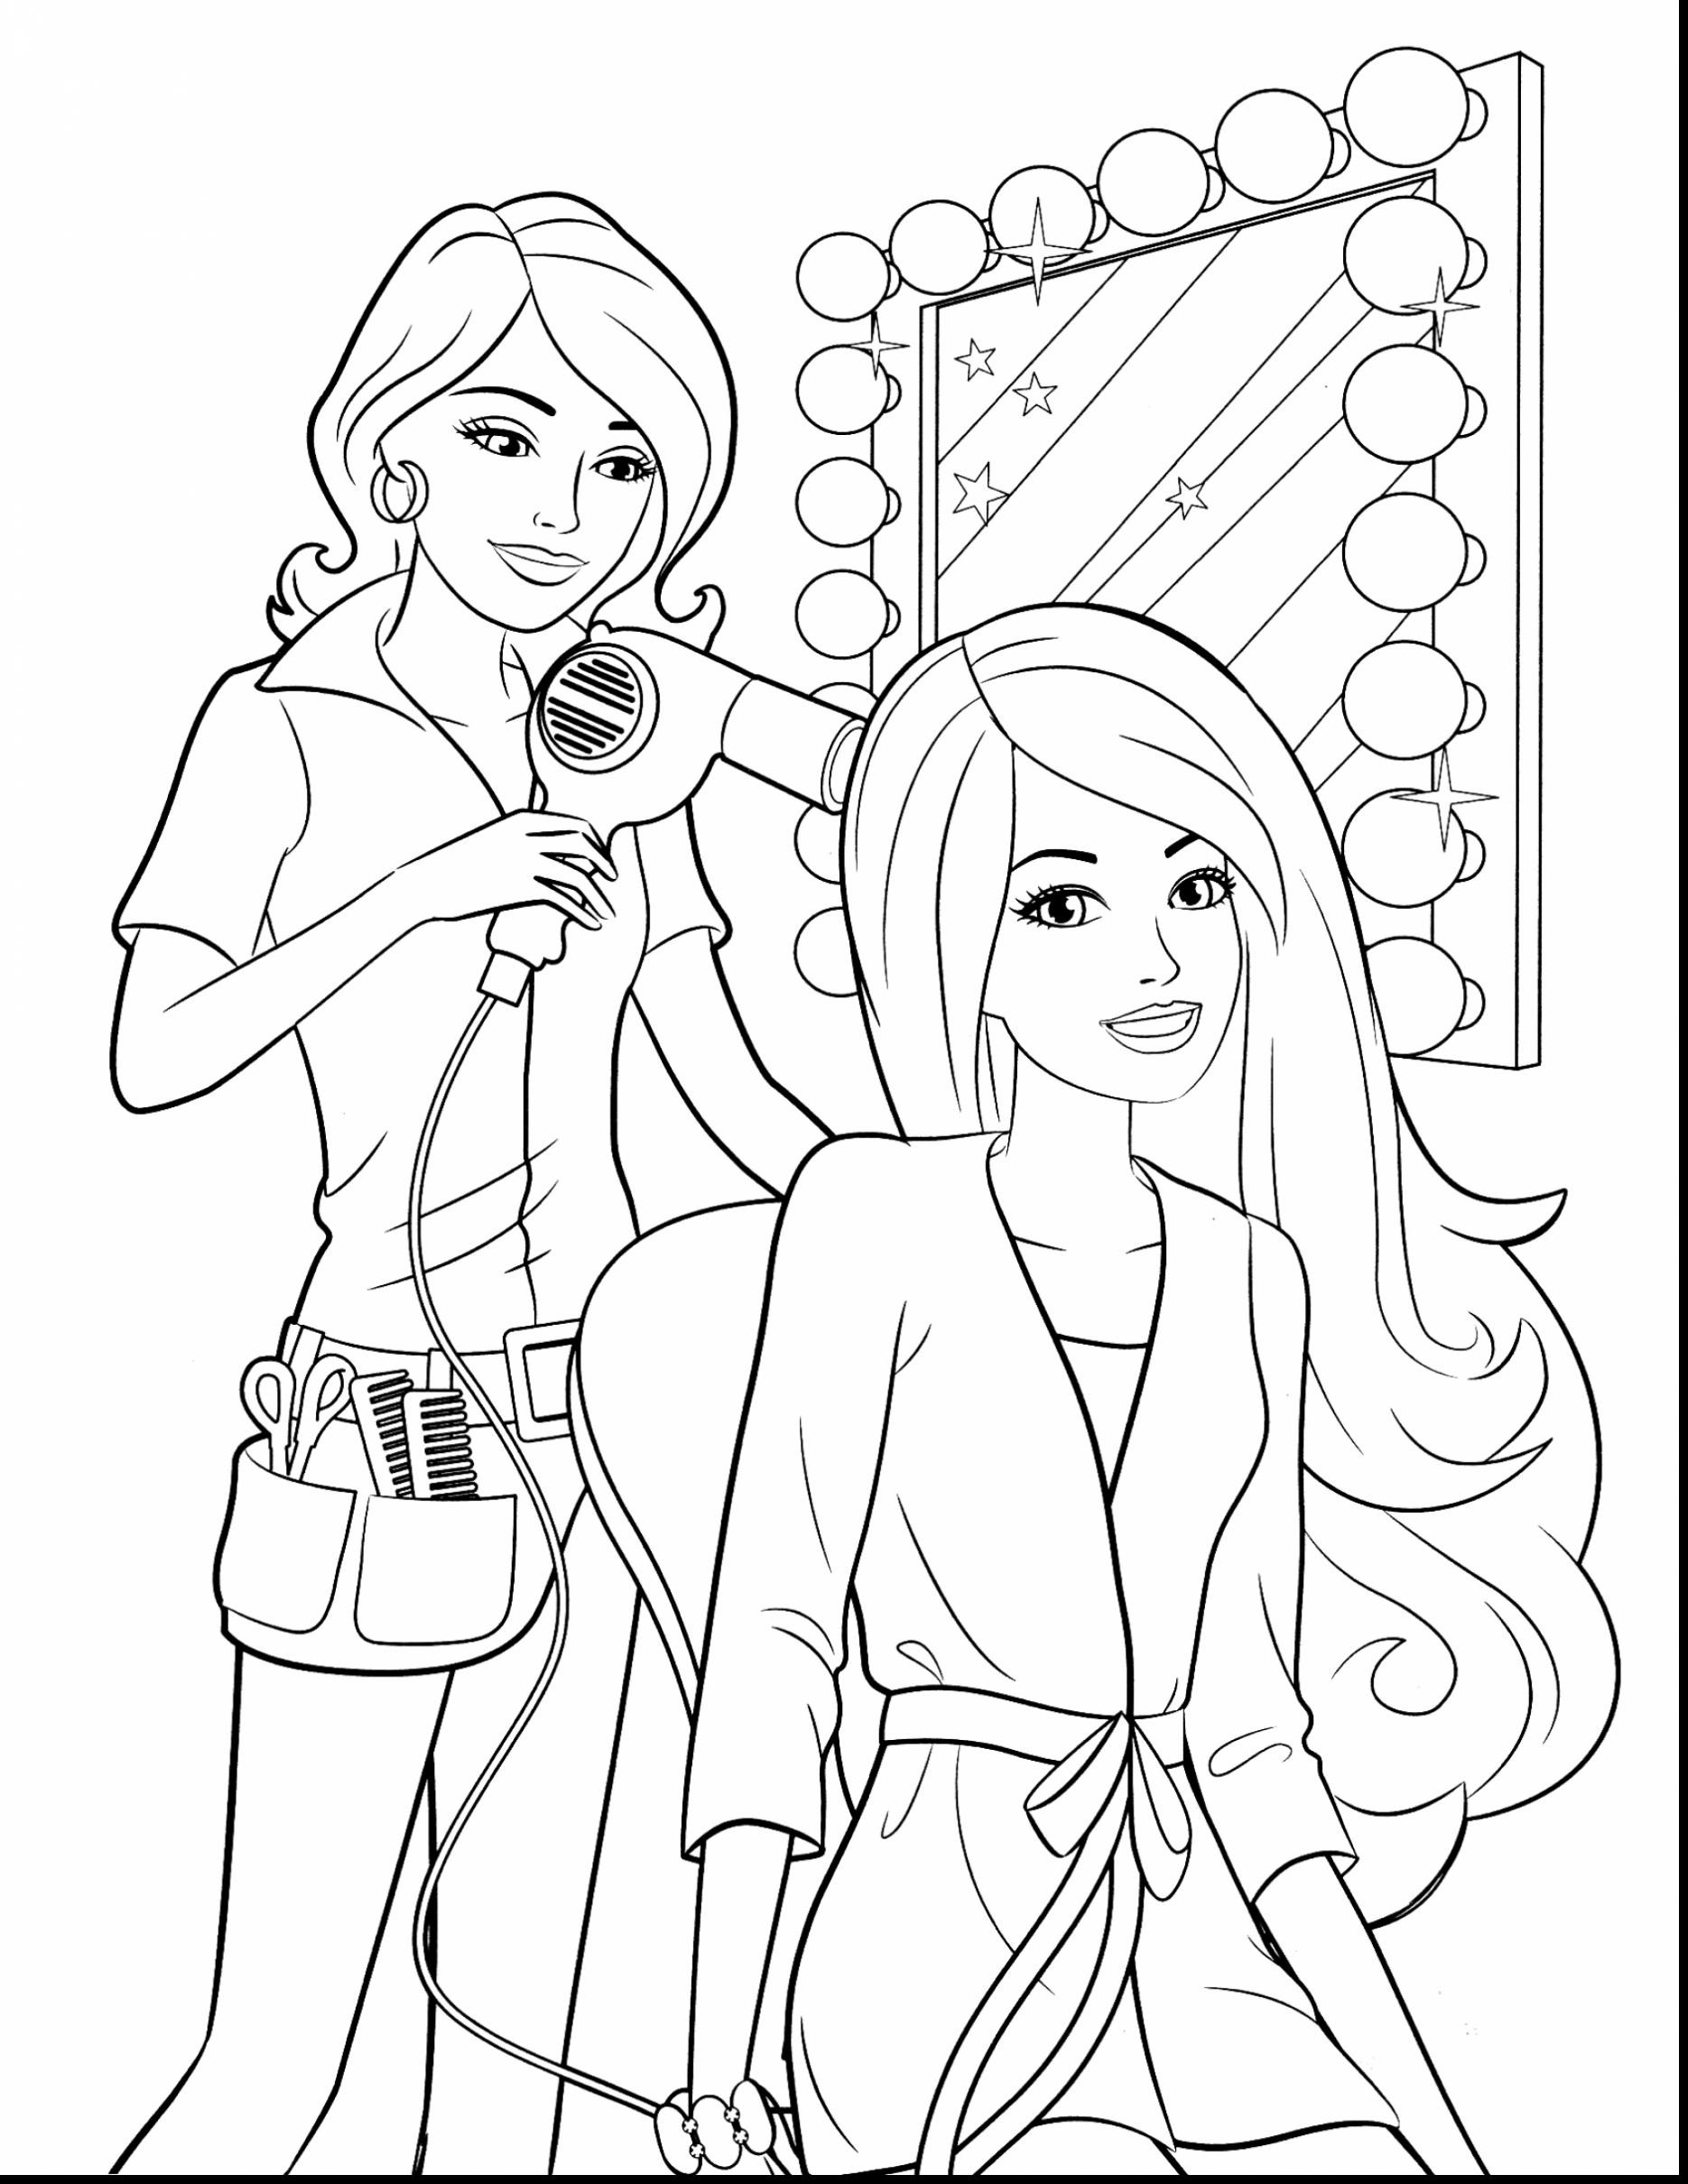 New Free Barbie Coloring Pages 49 With Additional Free Coloring Book with Free Barbie Coloring Pages